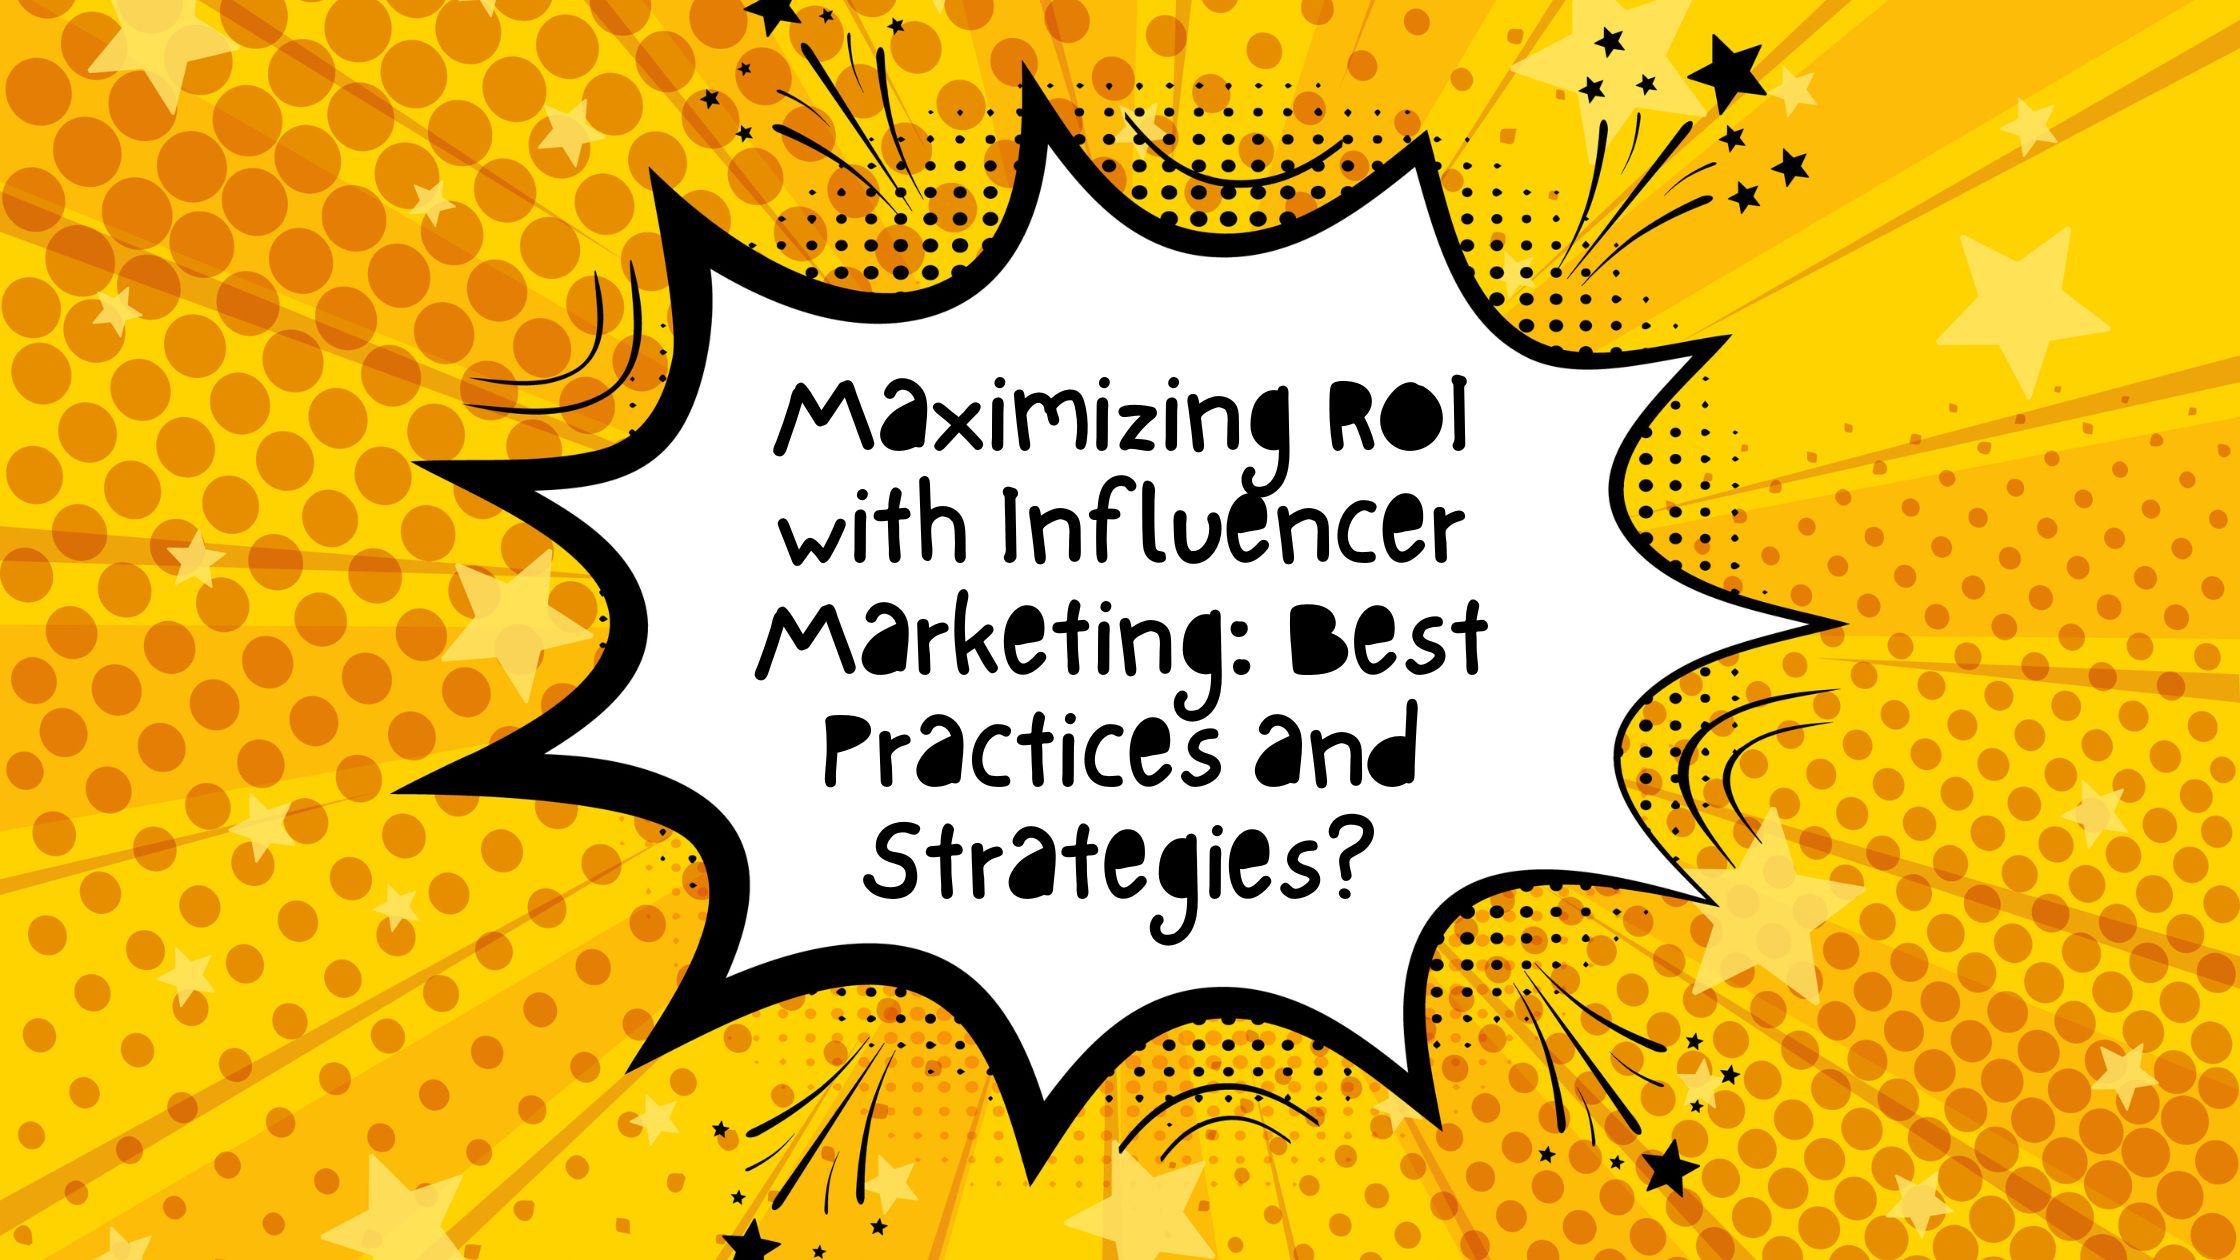 "Maximizing ROI with Influencer Marketing: Best Practices and Strategies?